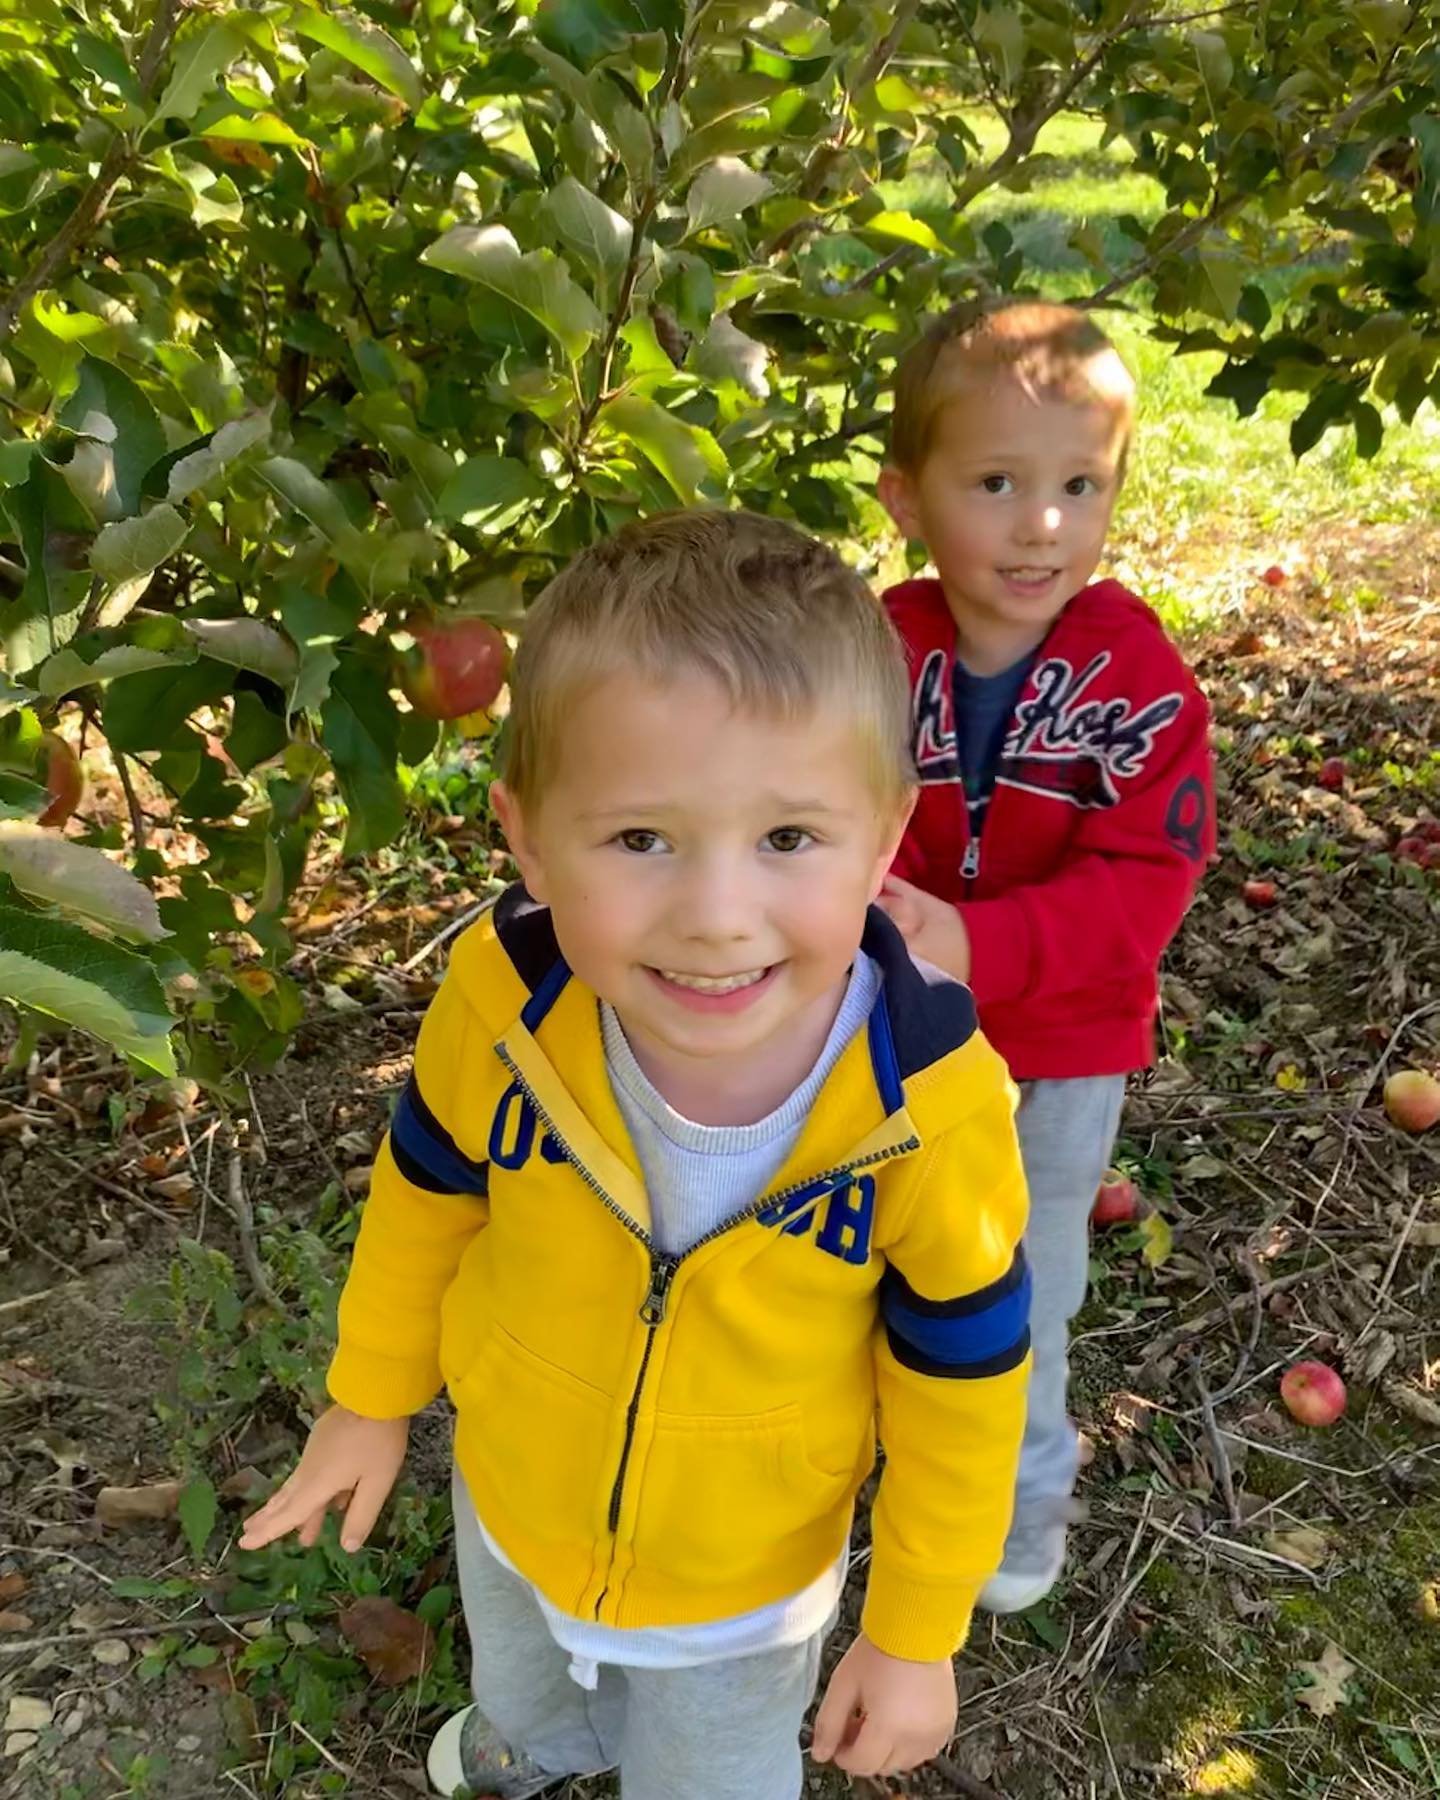 Apple &amp; Pumpkin picking with the twins. It was such a beautiful fall day 🍎🎃❤️💛
&bull;
#twins #boys #pumpkin #apple #october #halloween